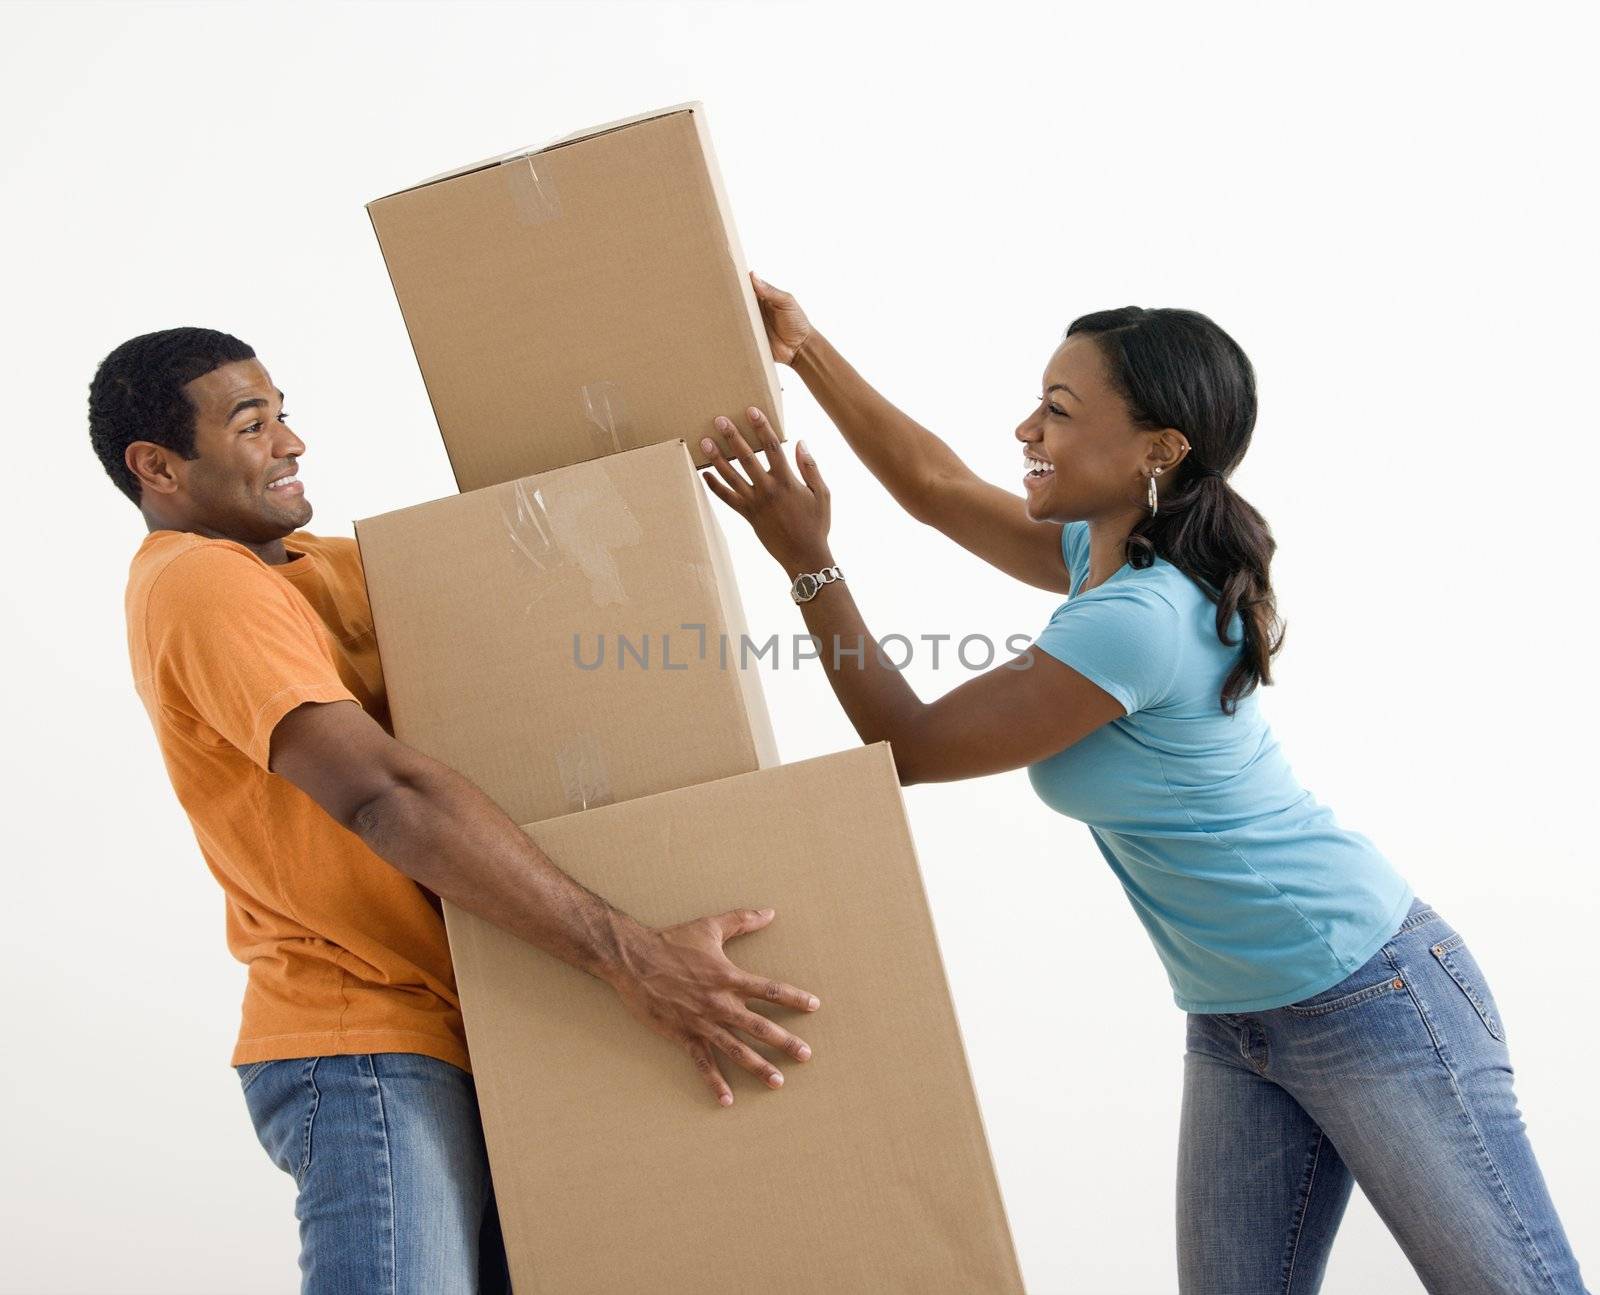 African American woman placing boxes on large stack man is holding.